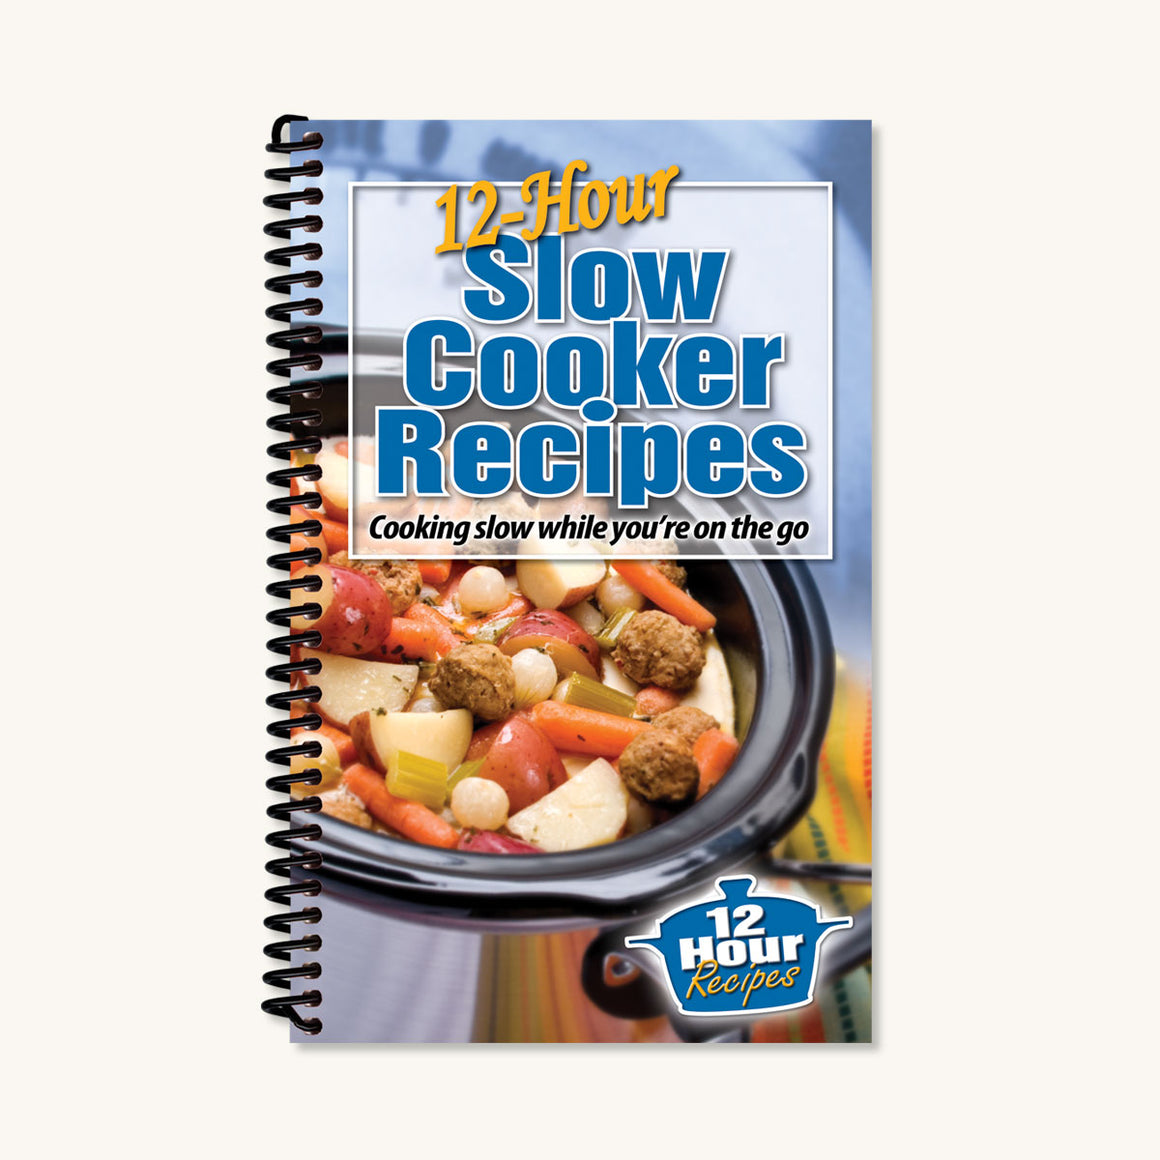 12-Hour Slow Cooker Recipes